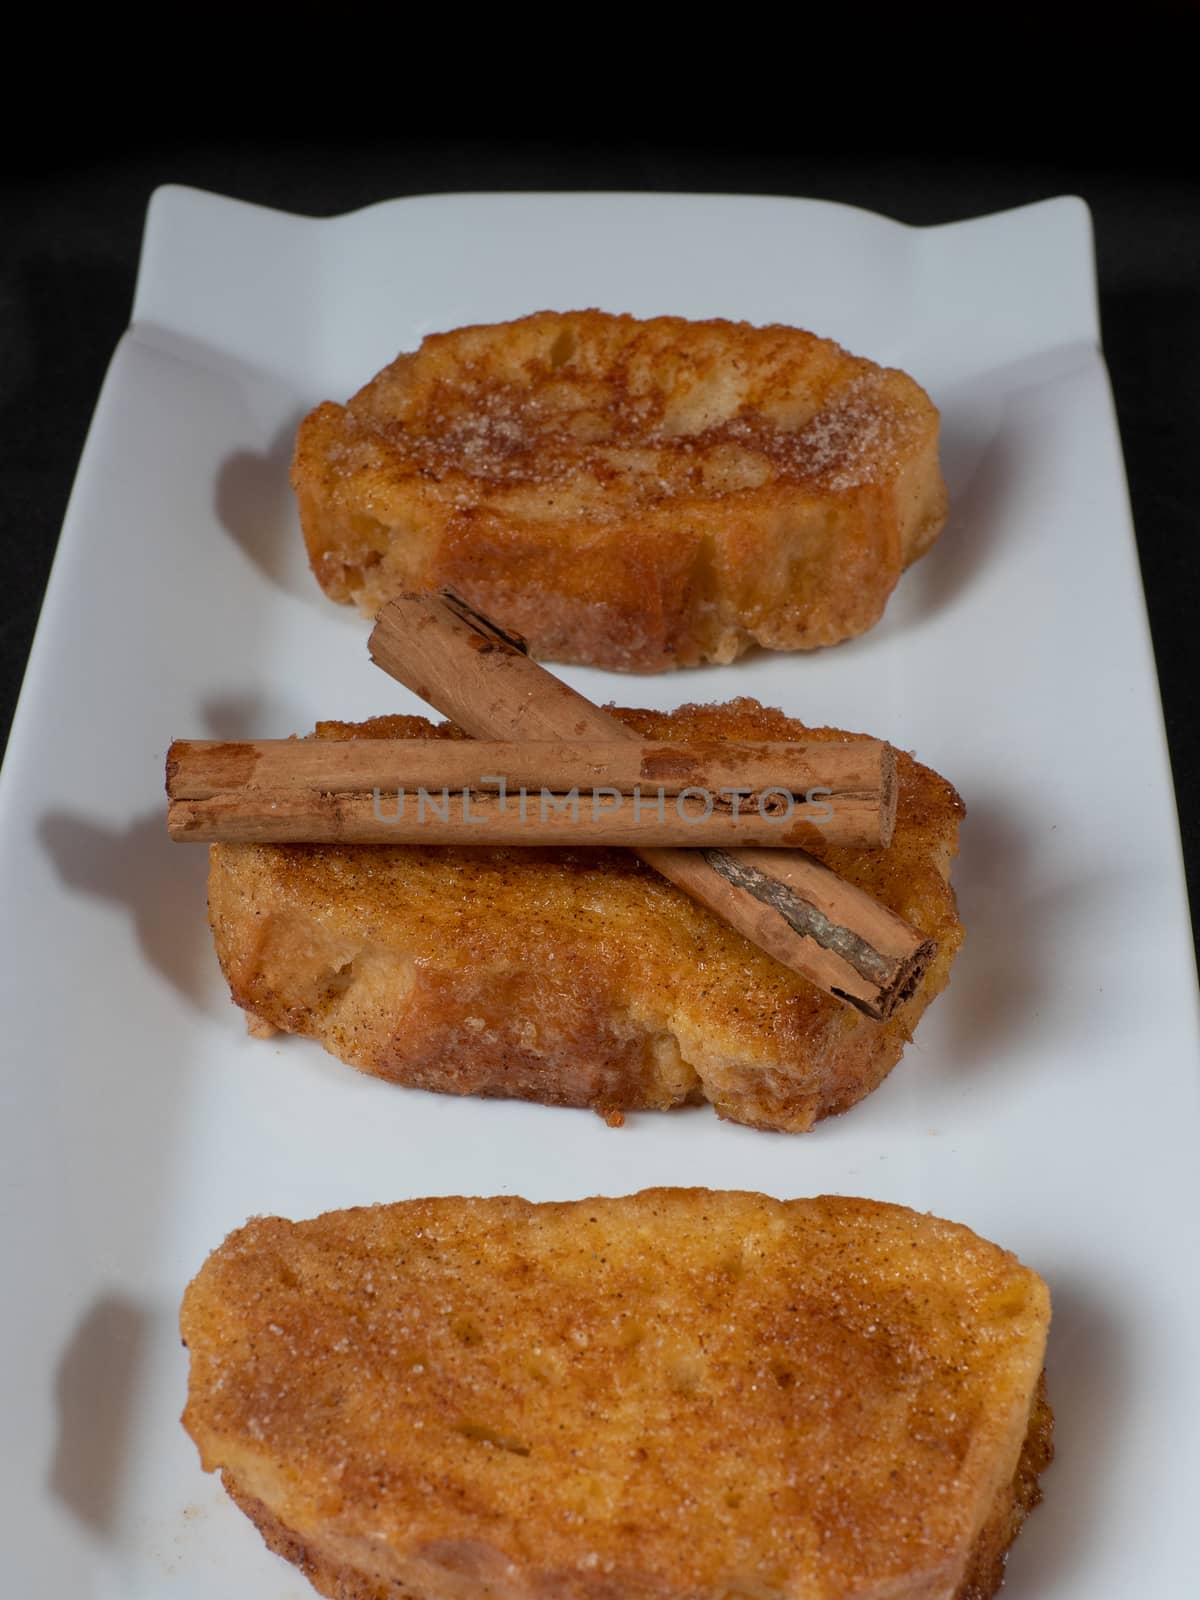 three french toast with cinnamon on white plate and dark background